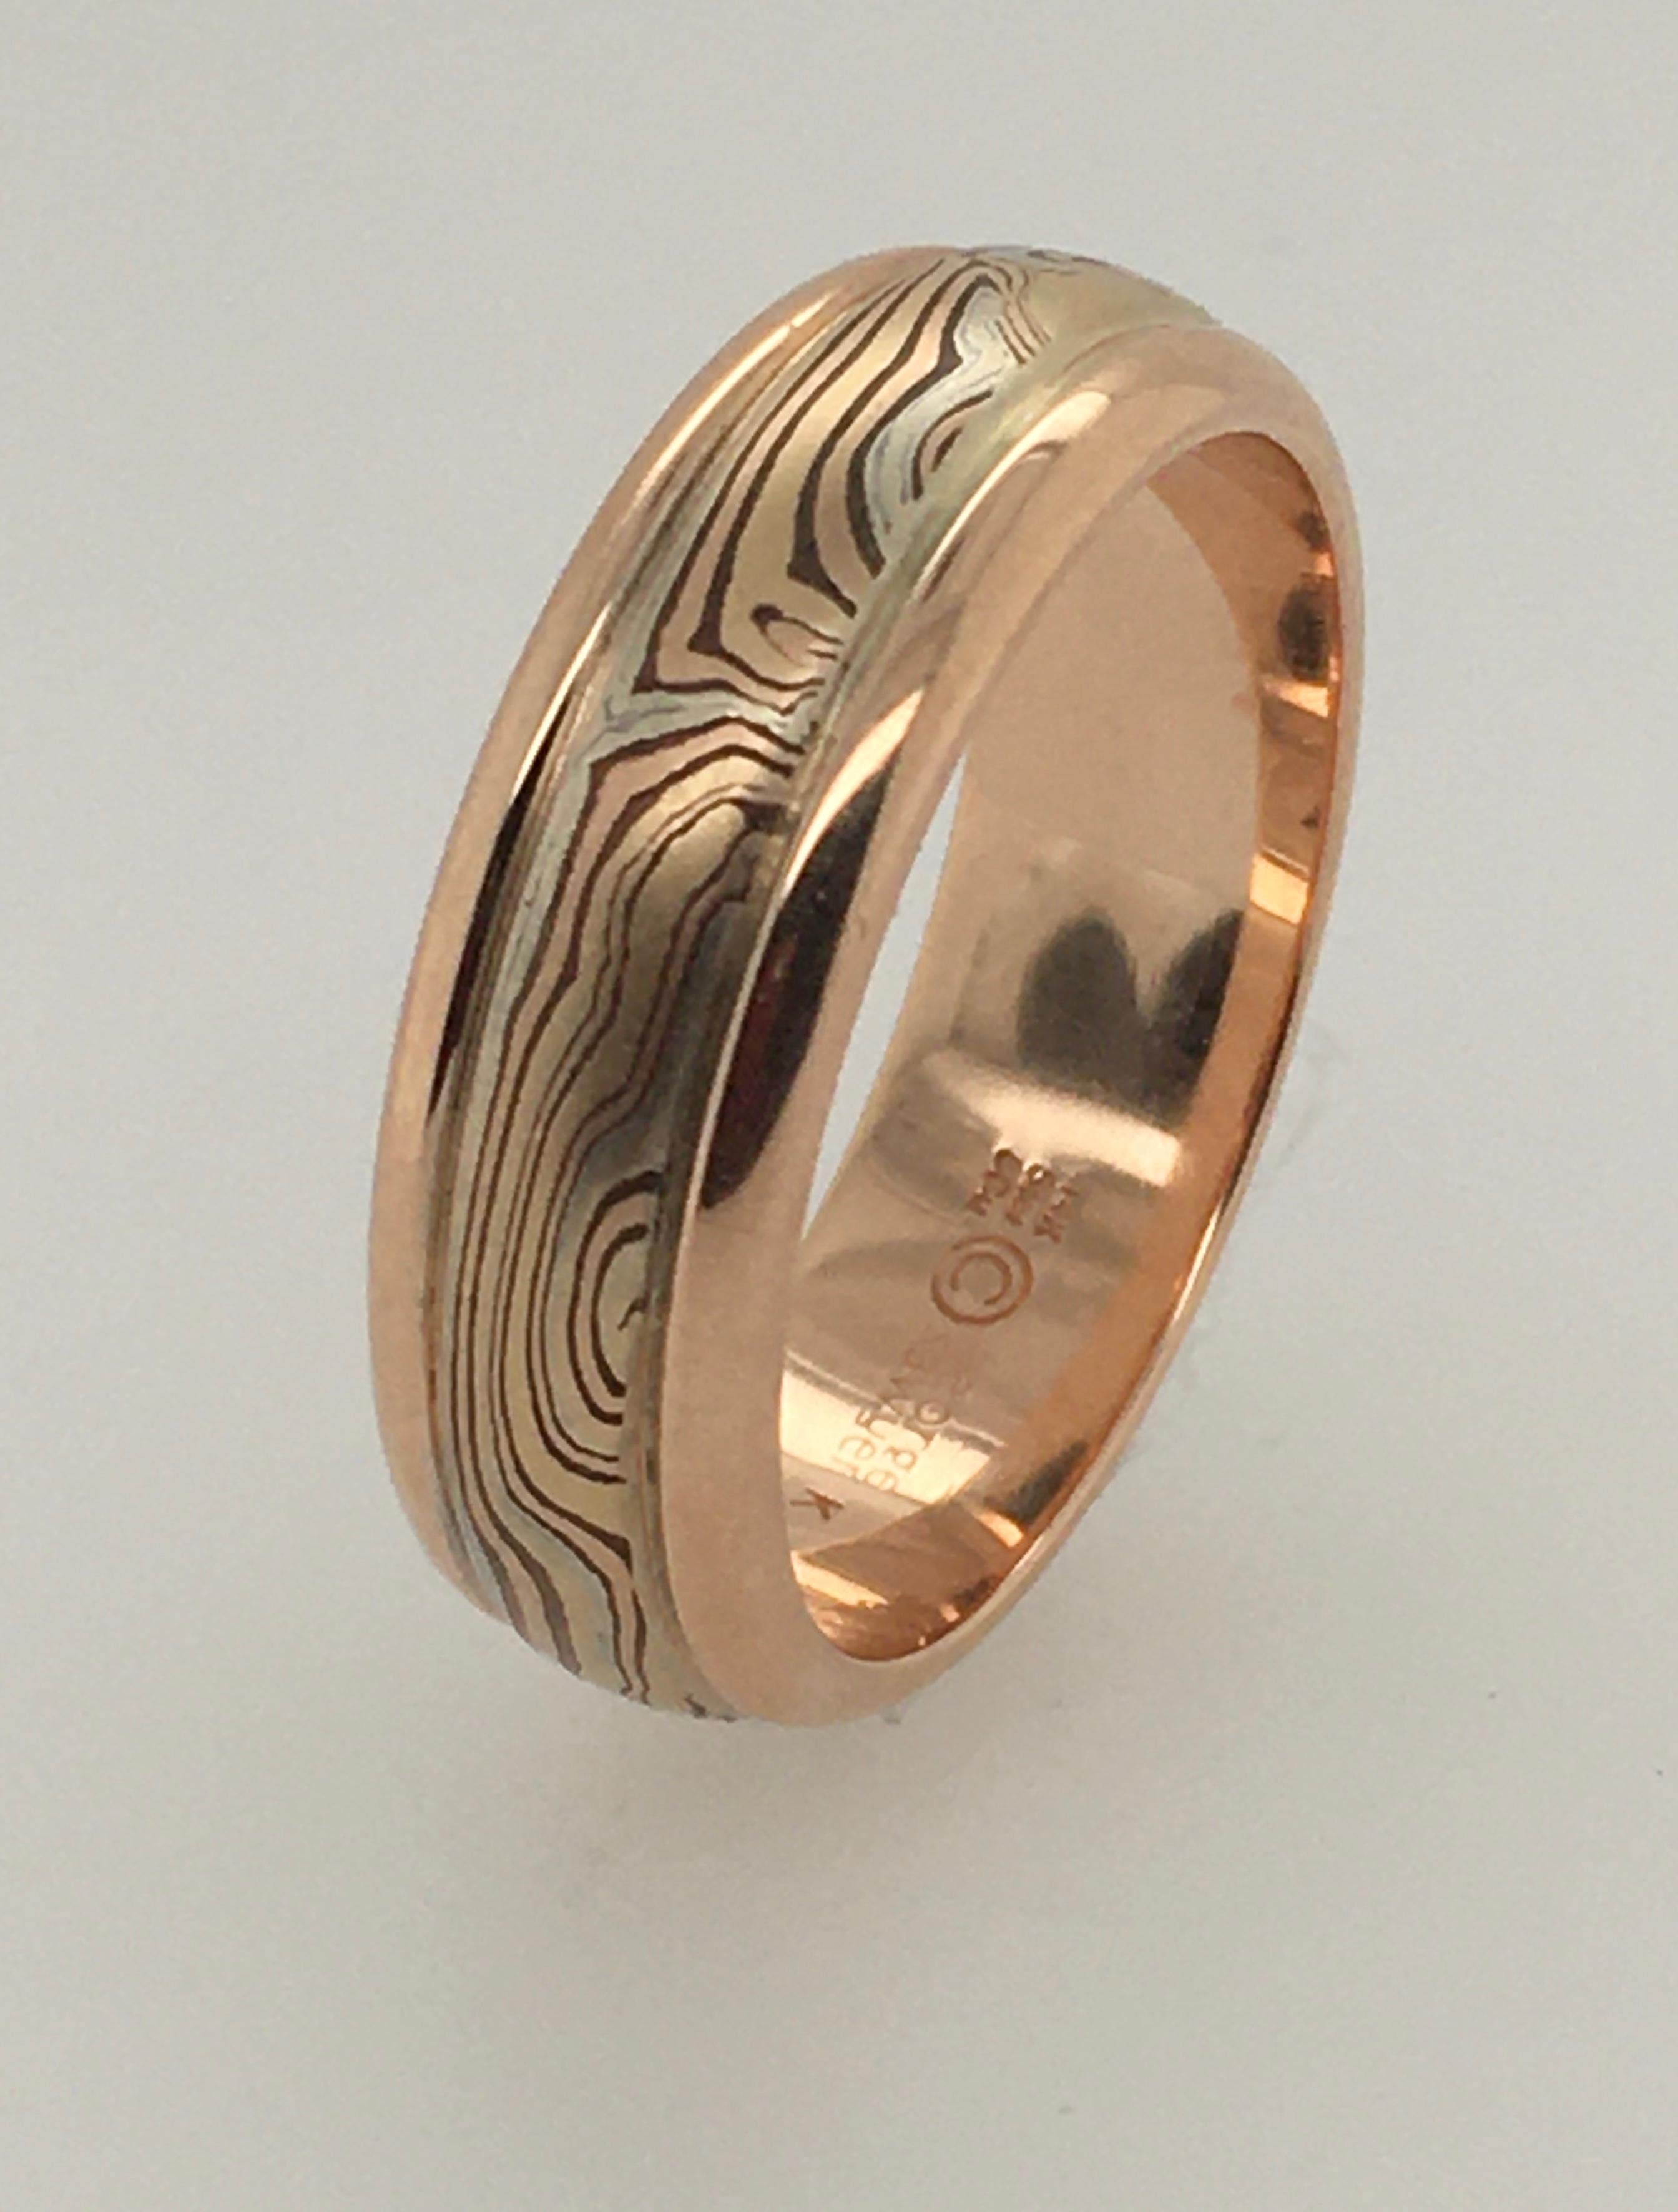 This beautiful hand-wrought George Sawyer 7 mm Mokume round-edged band features 14K red and yellow gold edges surrounding the distinctive sterling silver & etched copper.  The interior is stamped 